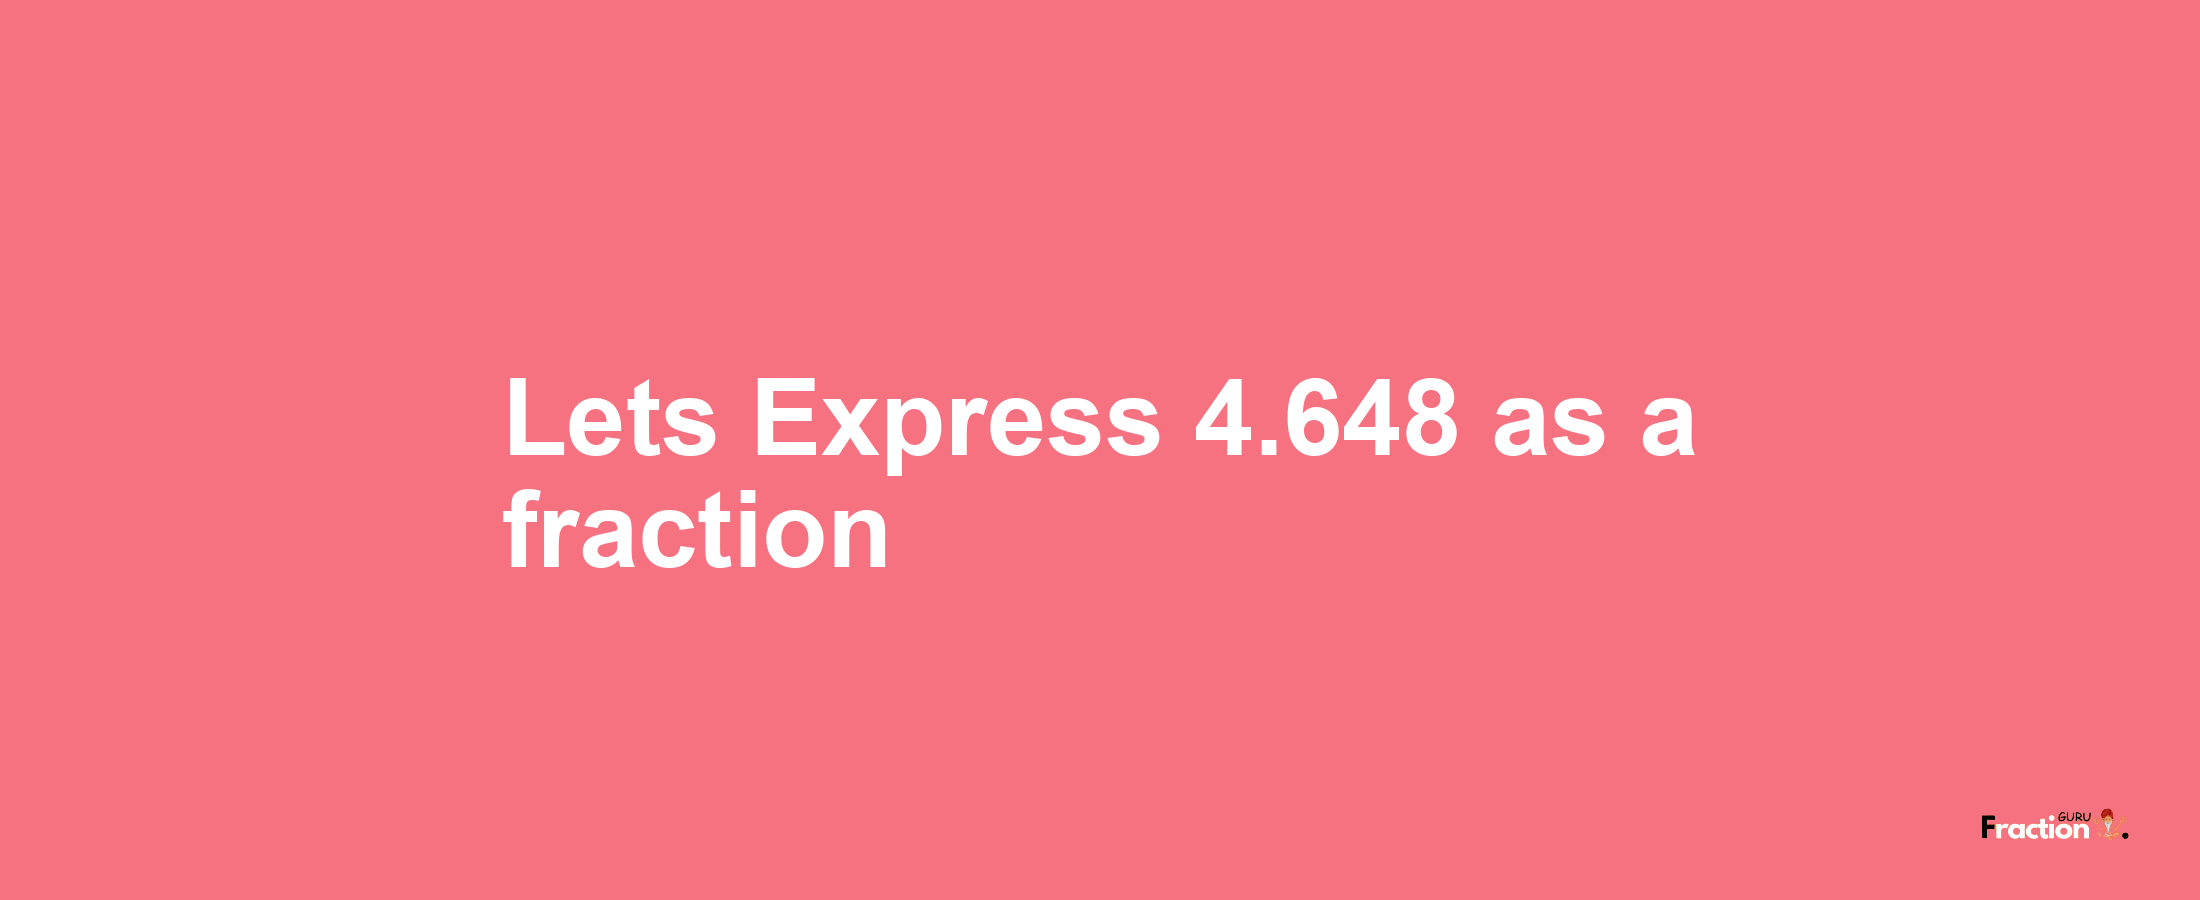 Lets Express 4.648 as afraction